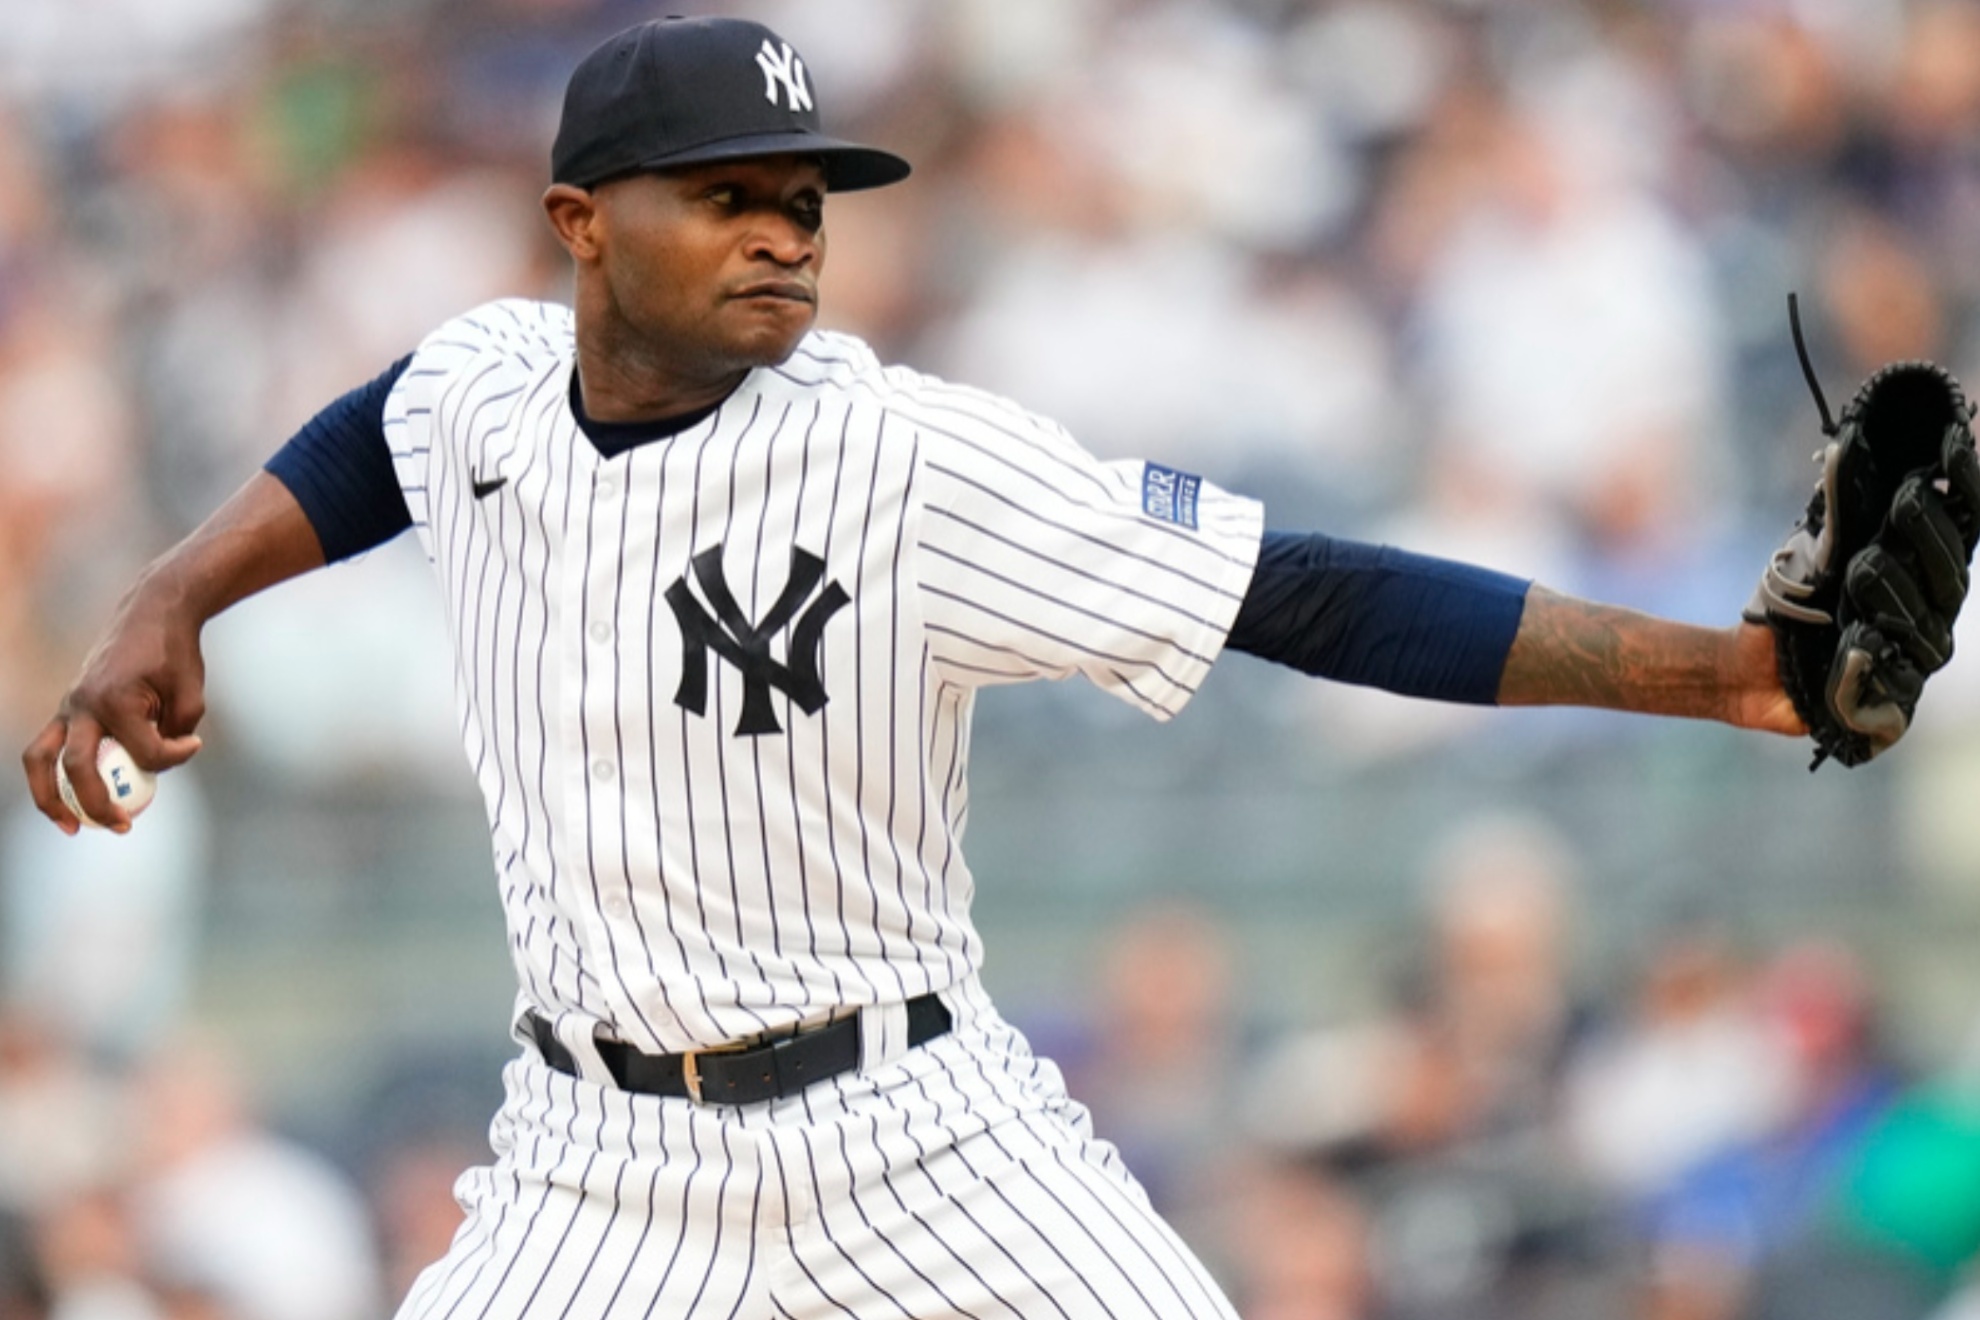 Former Yankees pitcher Domingo German looking to make his way back to Major League Baseball